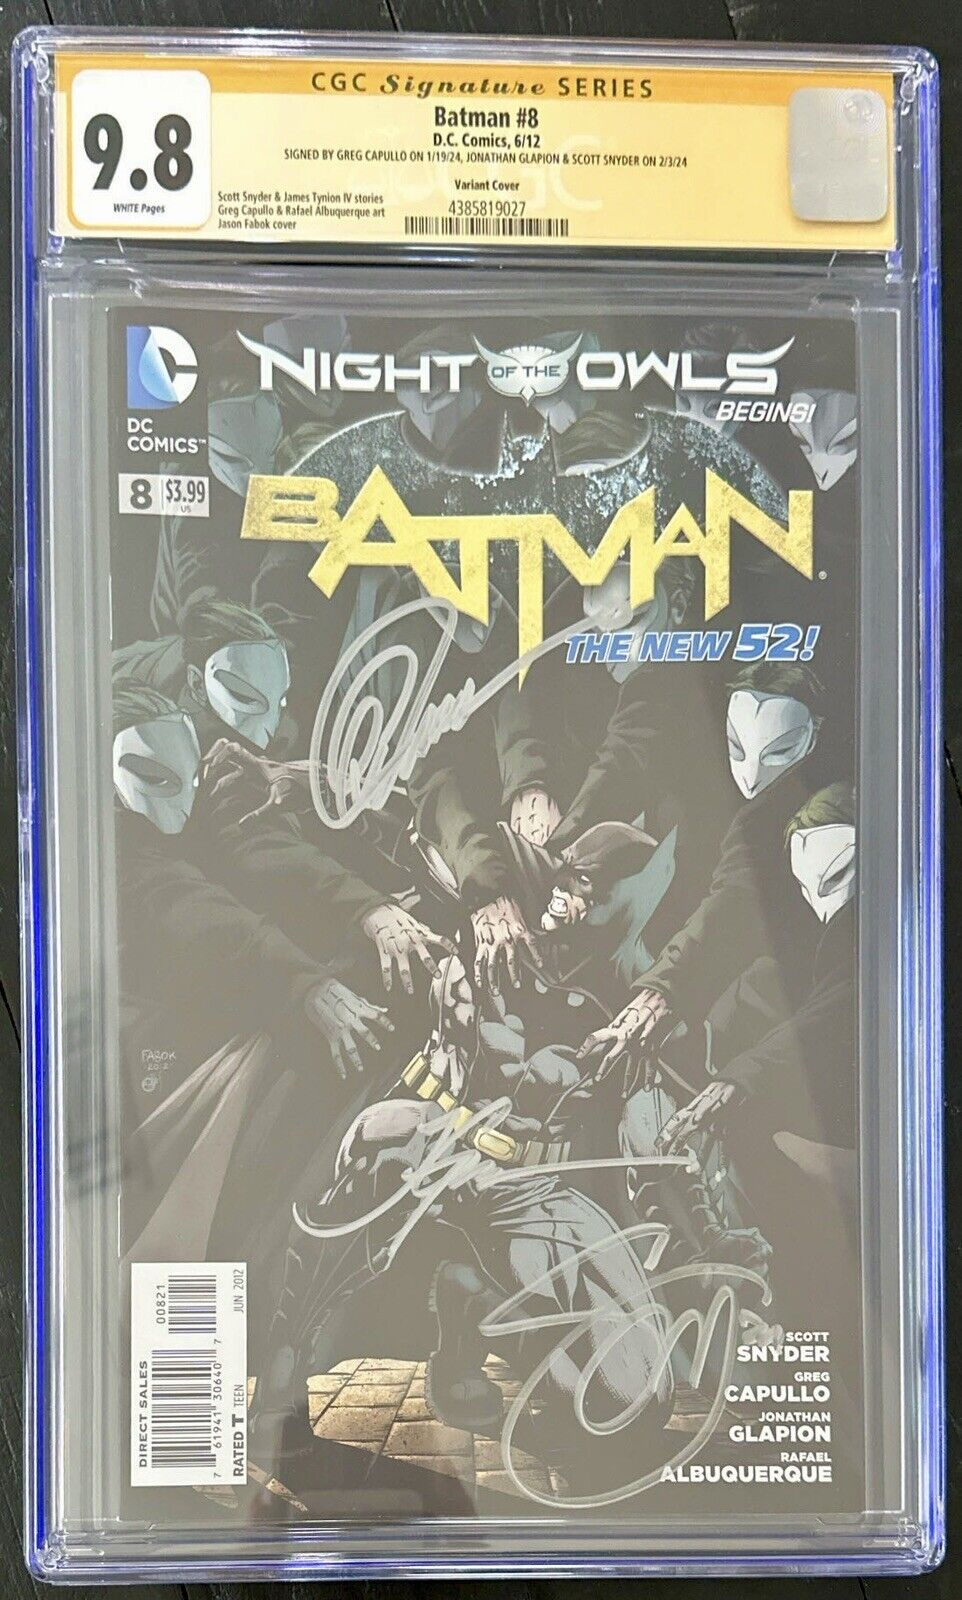 Batman #8 FABOK VARIANT COVER CGC SS 9.8 SIGS BY CAPULLO, SNYDER, GLAPION H/P